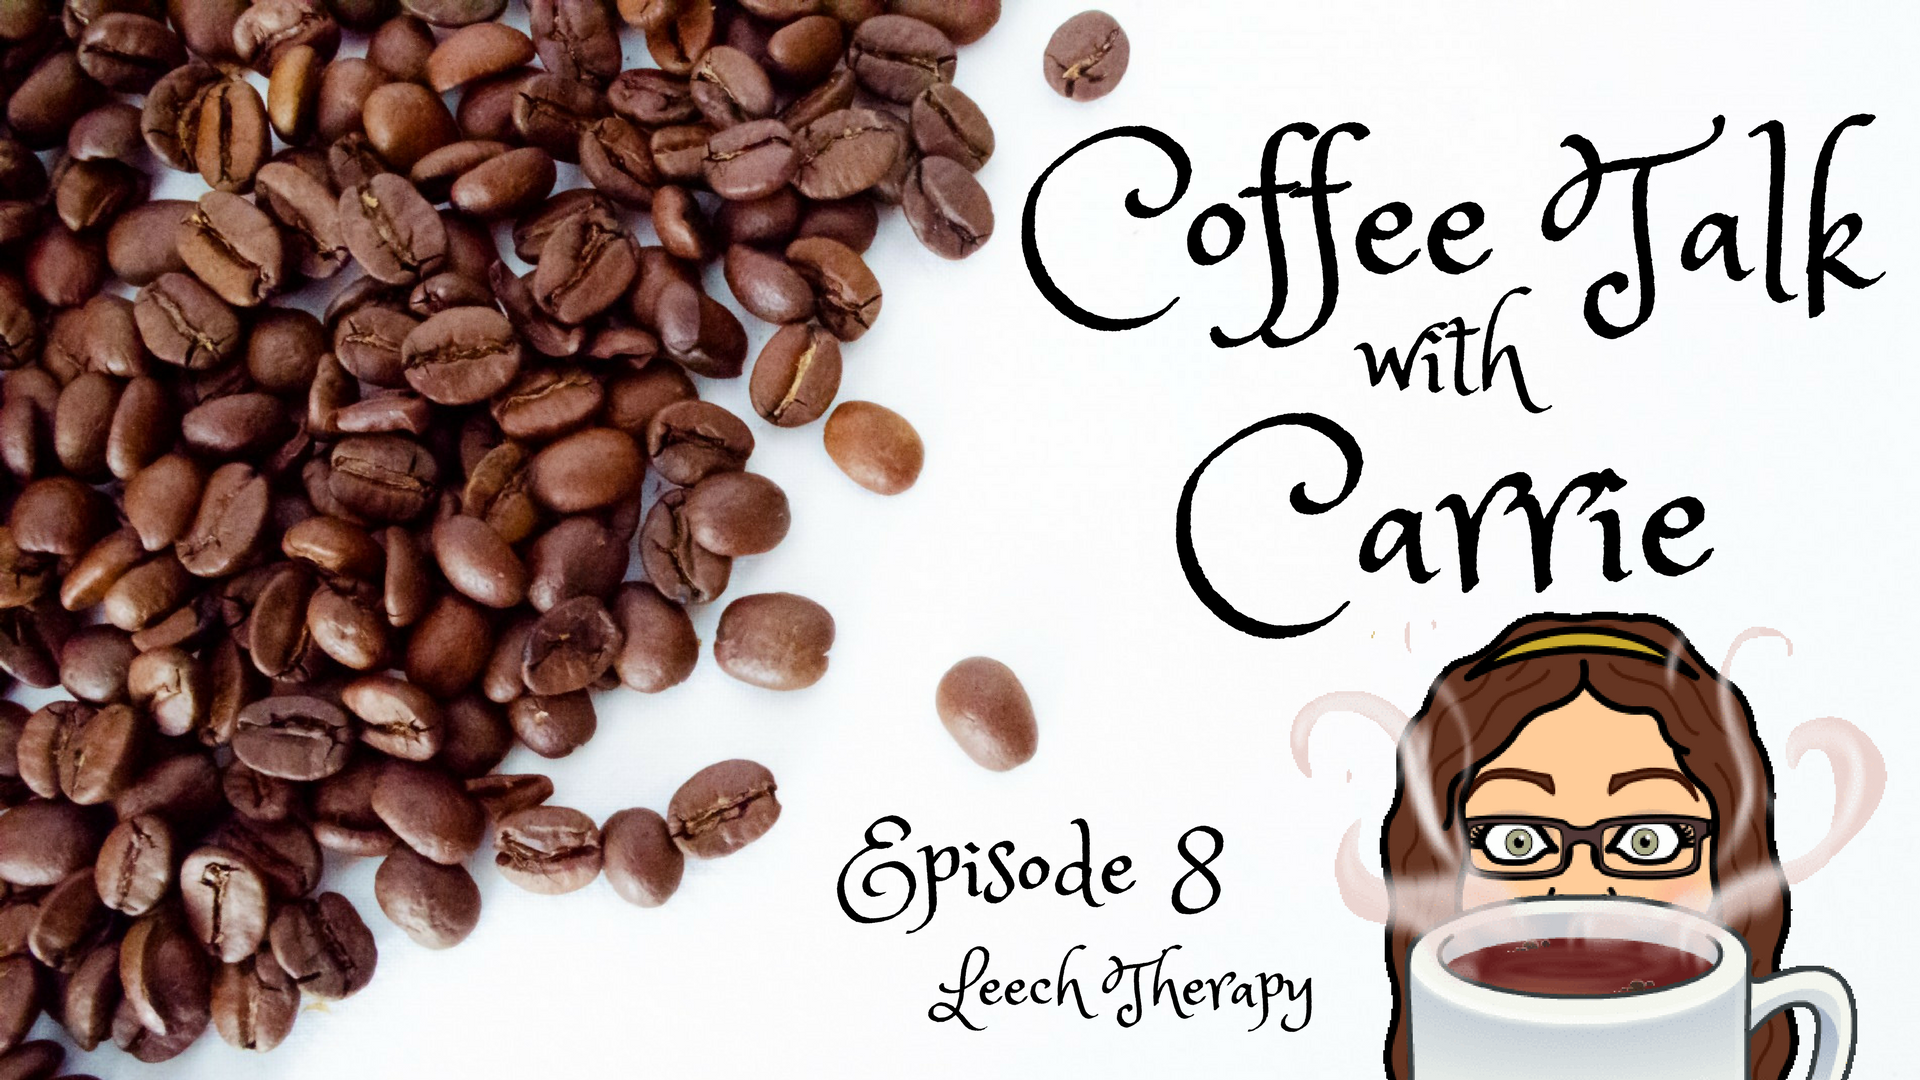 Coffee Talk with Carrie e8.png